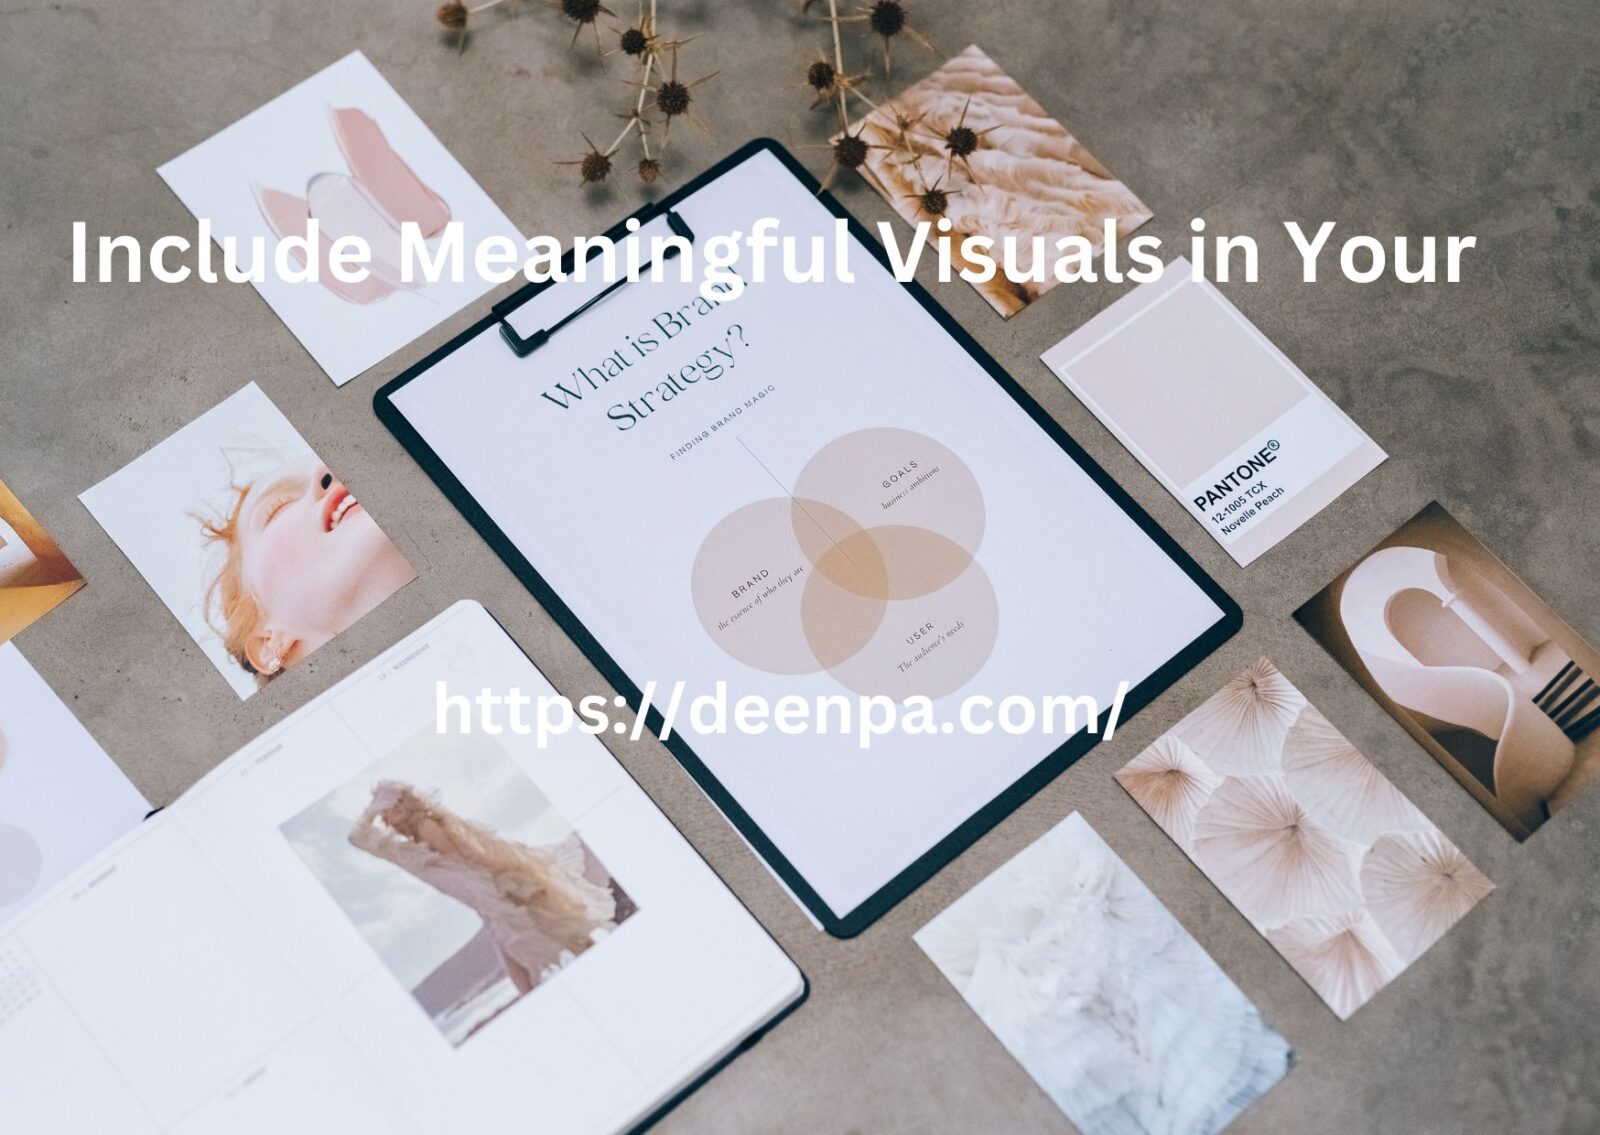 Include Meaningful Visuals in Your 